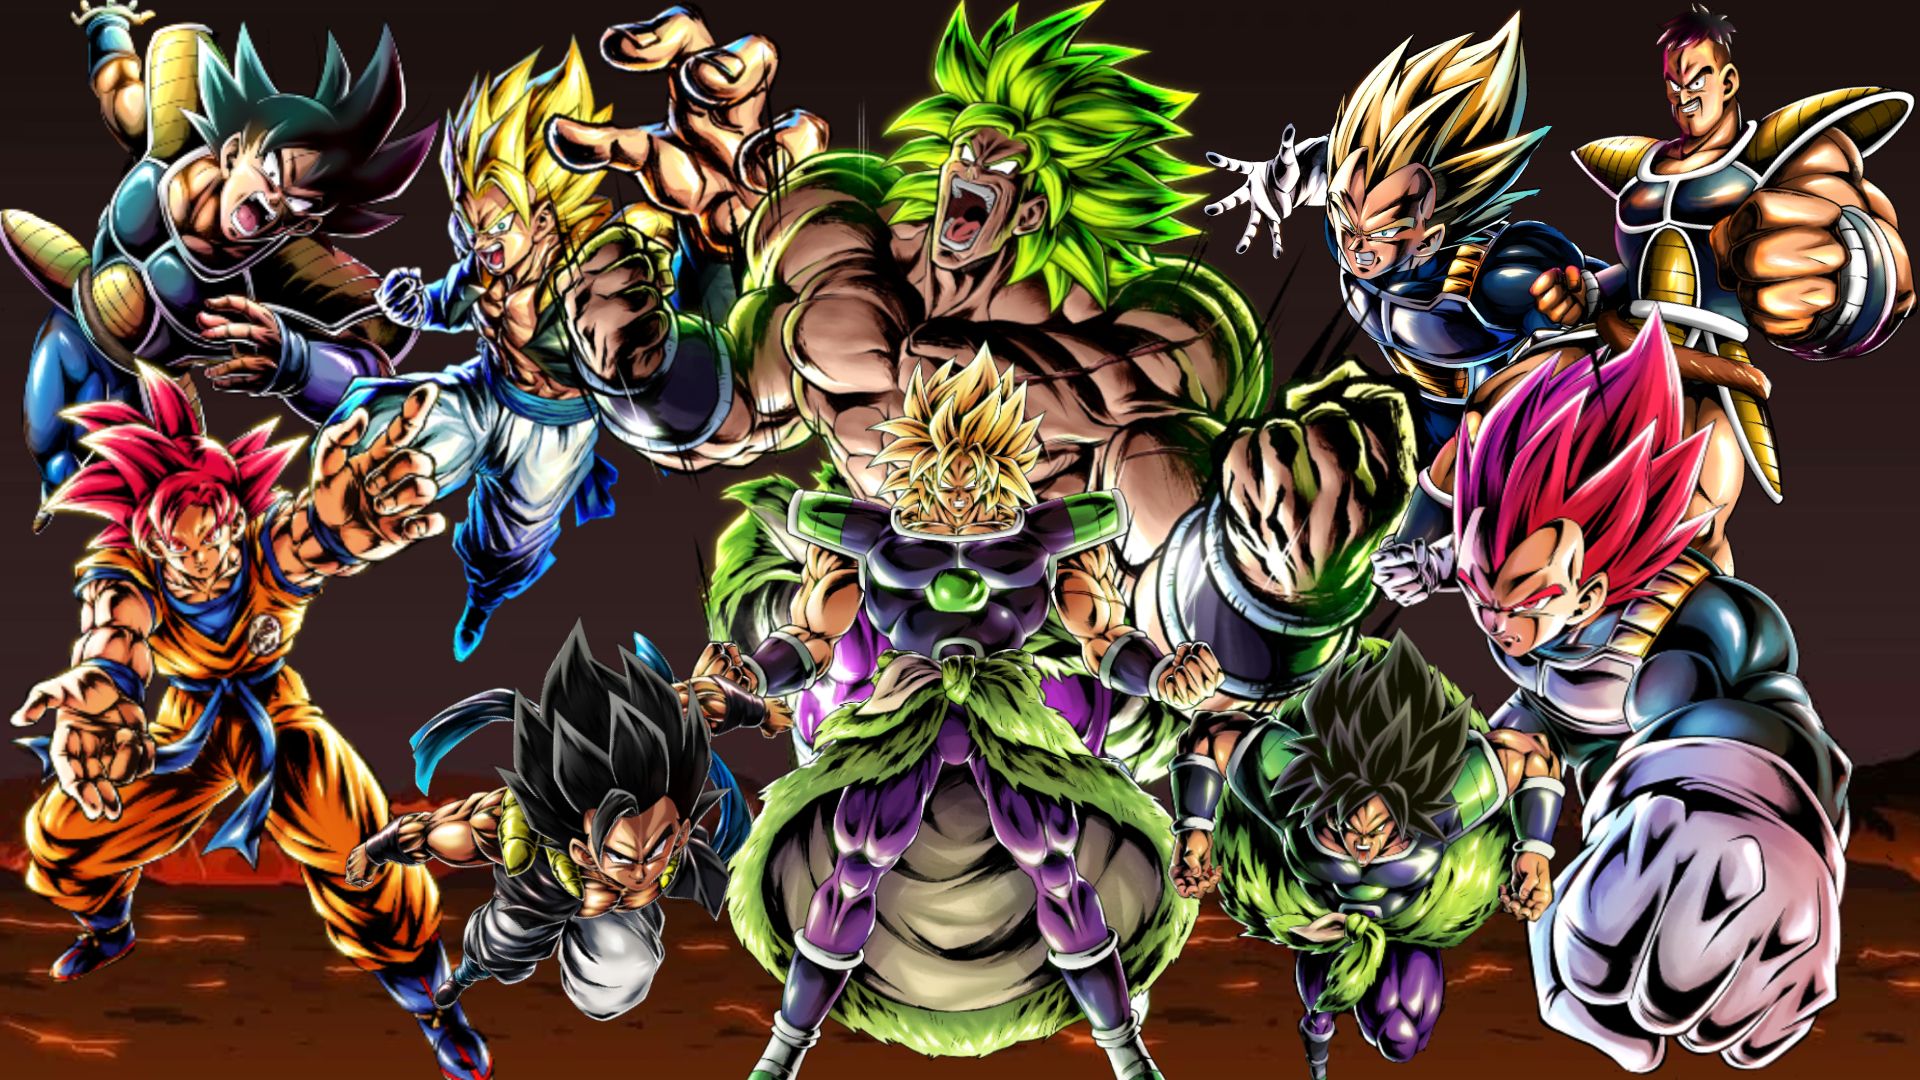 Whipped up a Dragon Ball Super: Broly wallpaper using only legends art